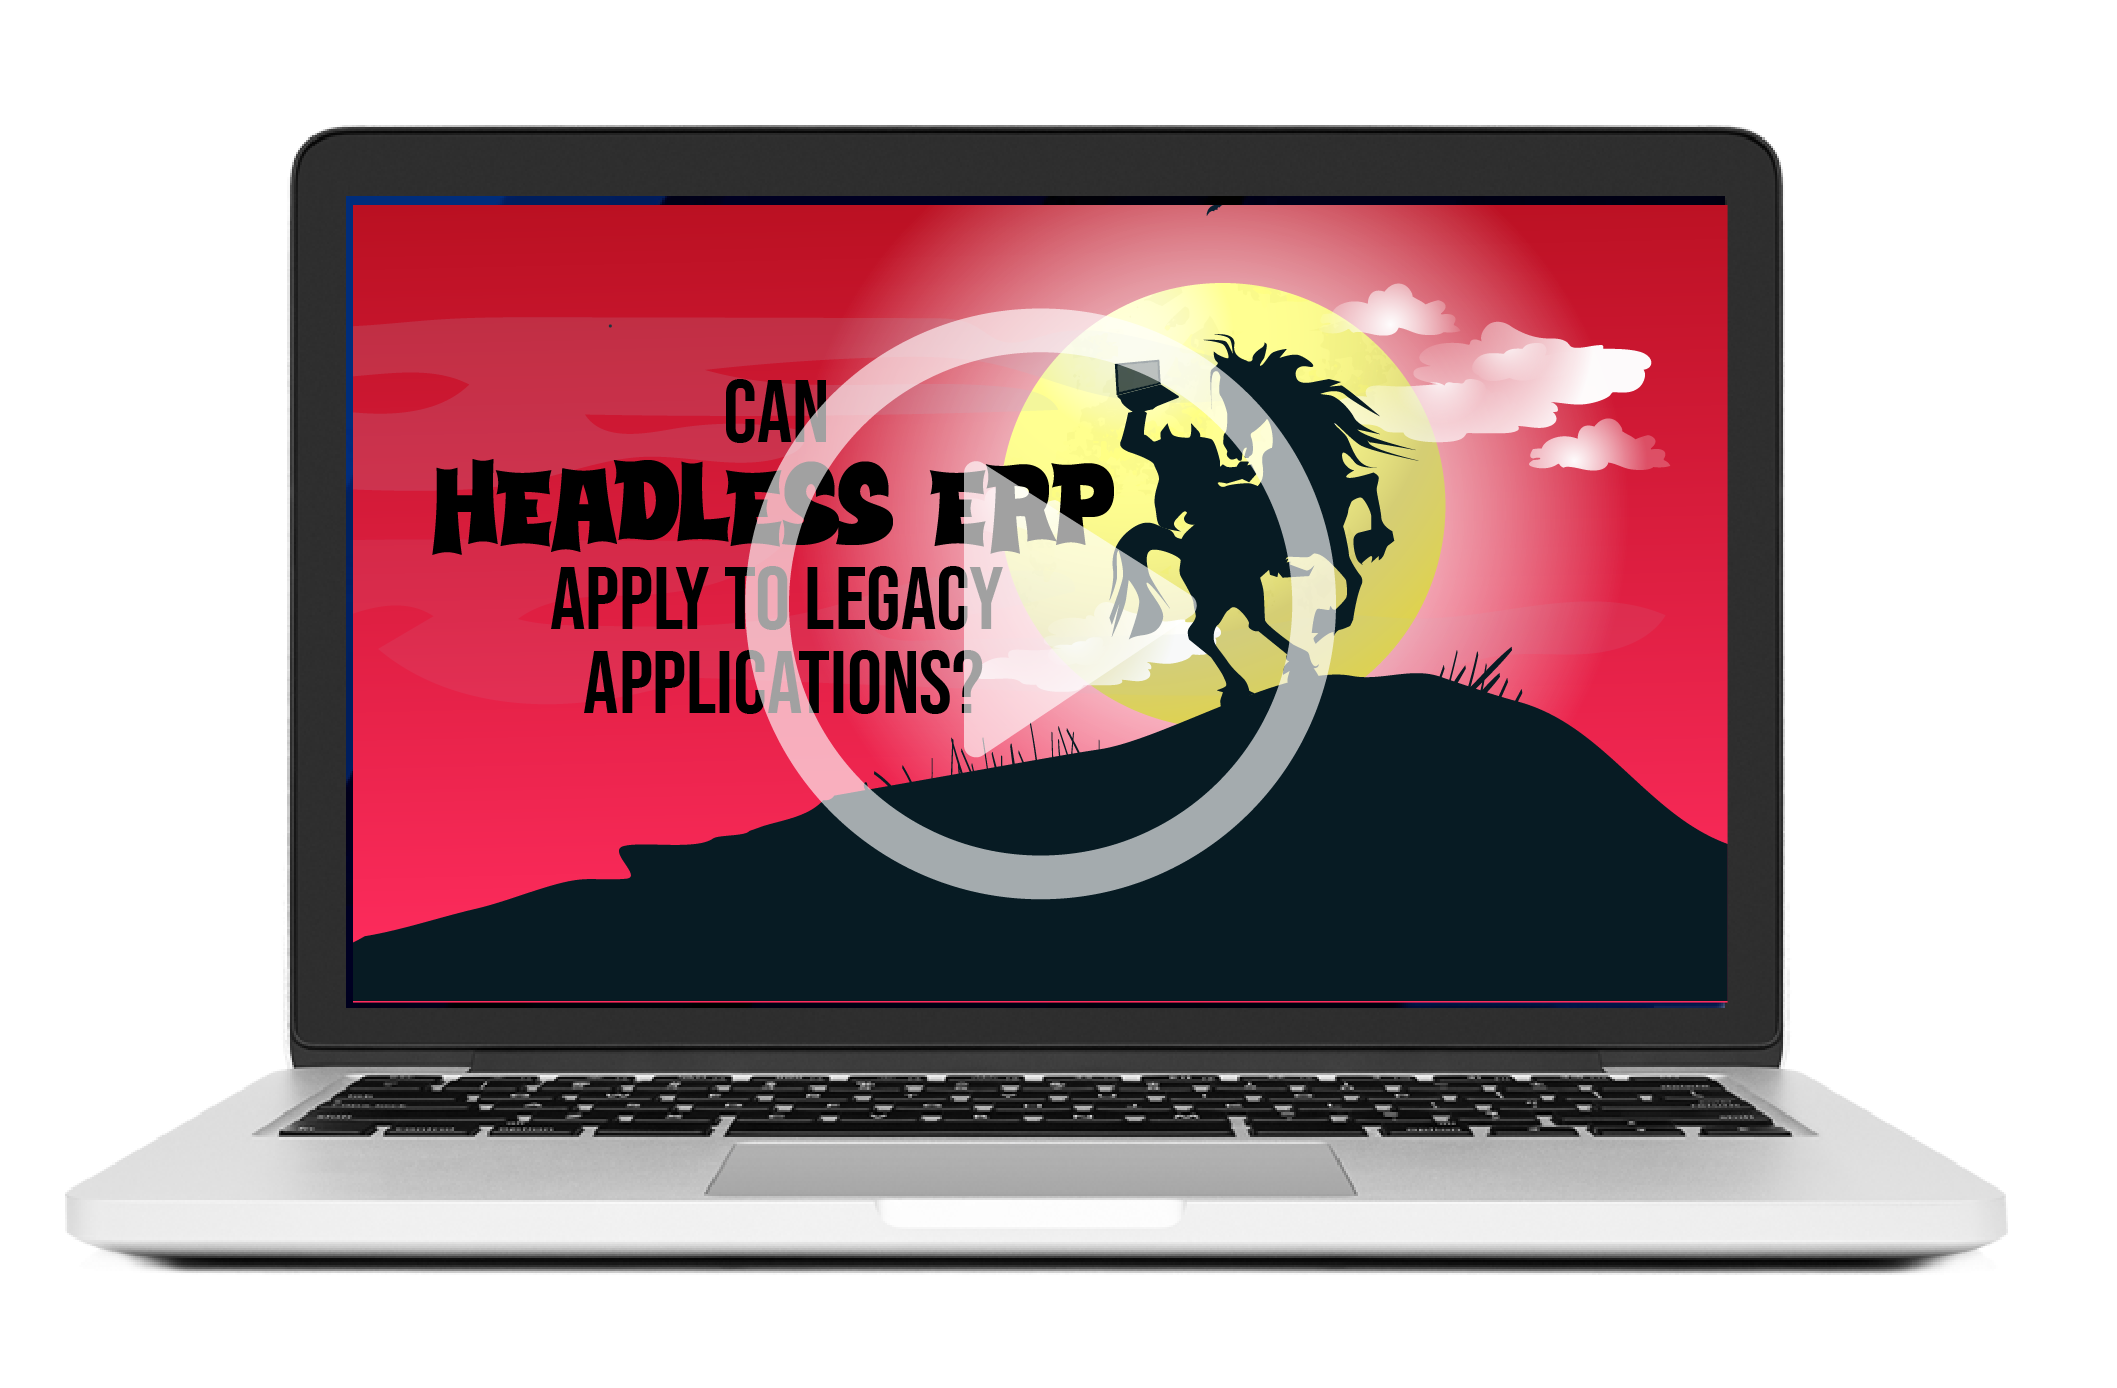 Can Headless ERP Apply to Legacy Applications?